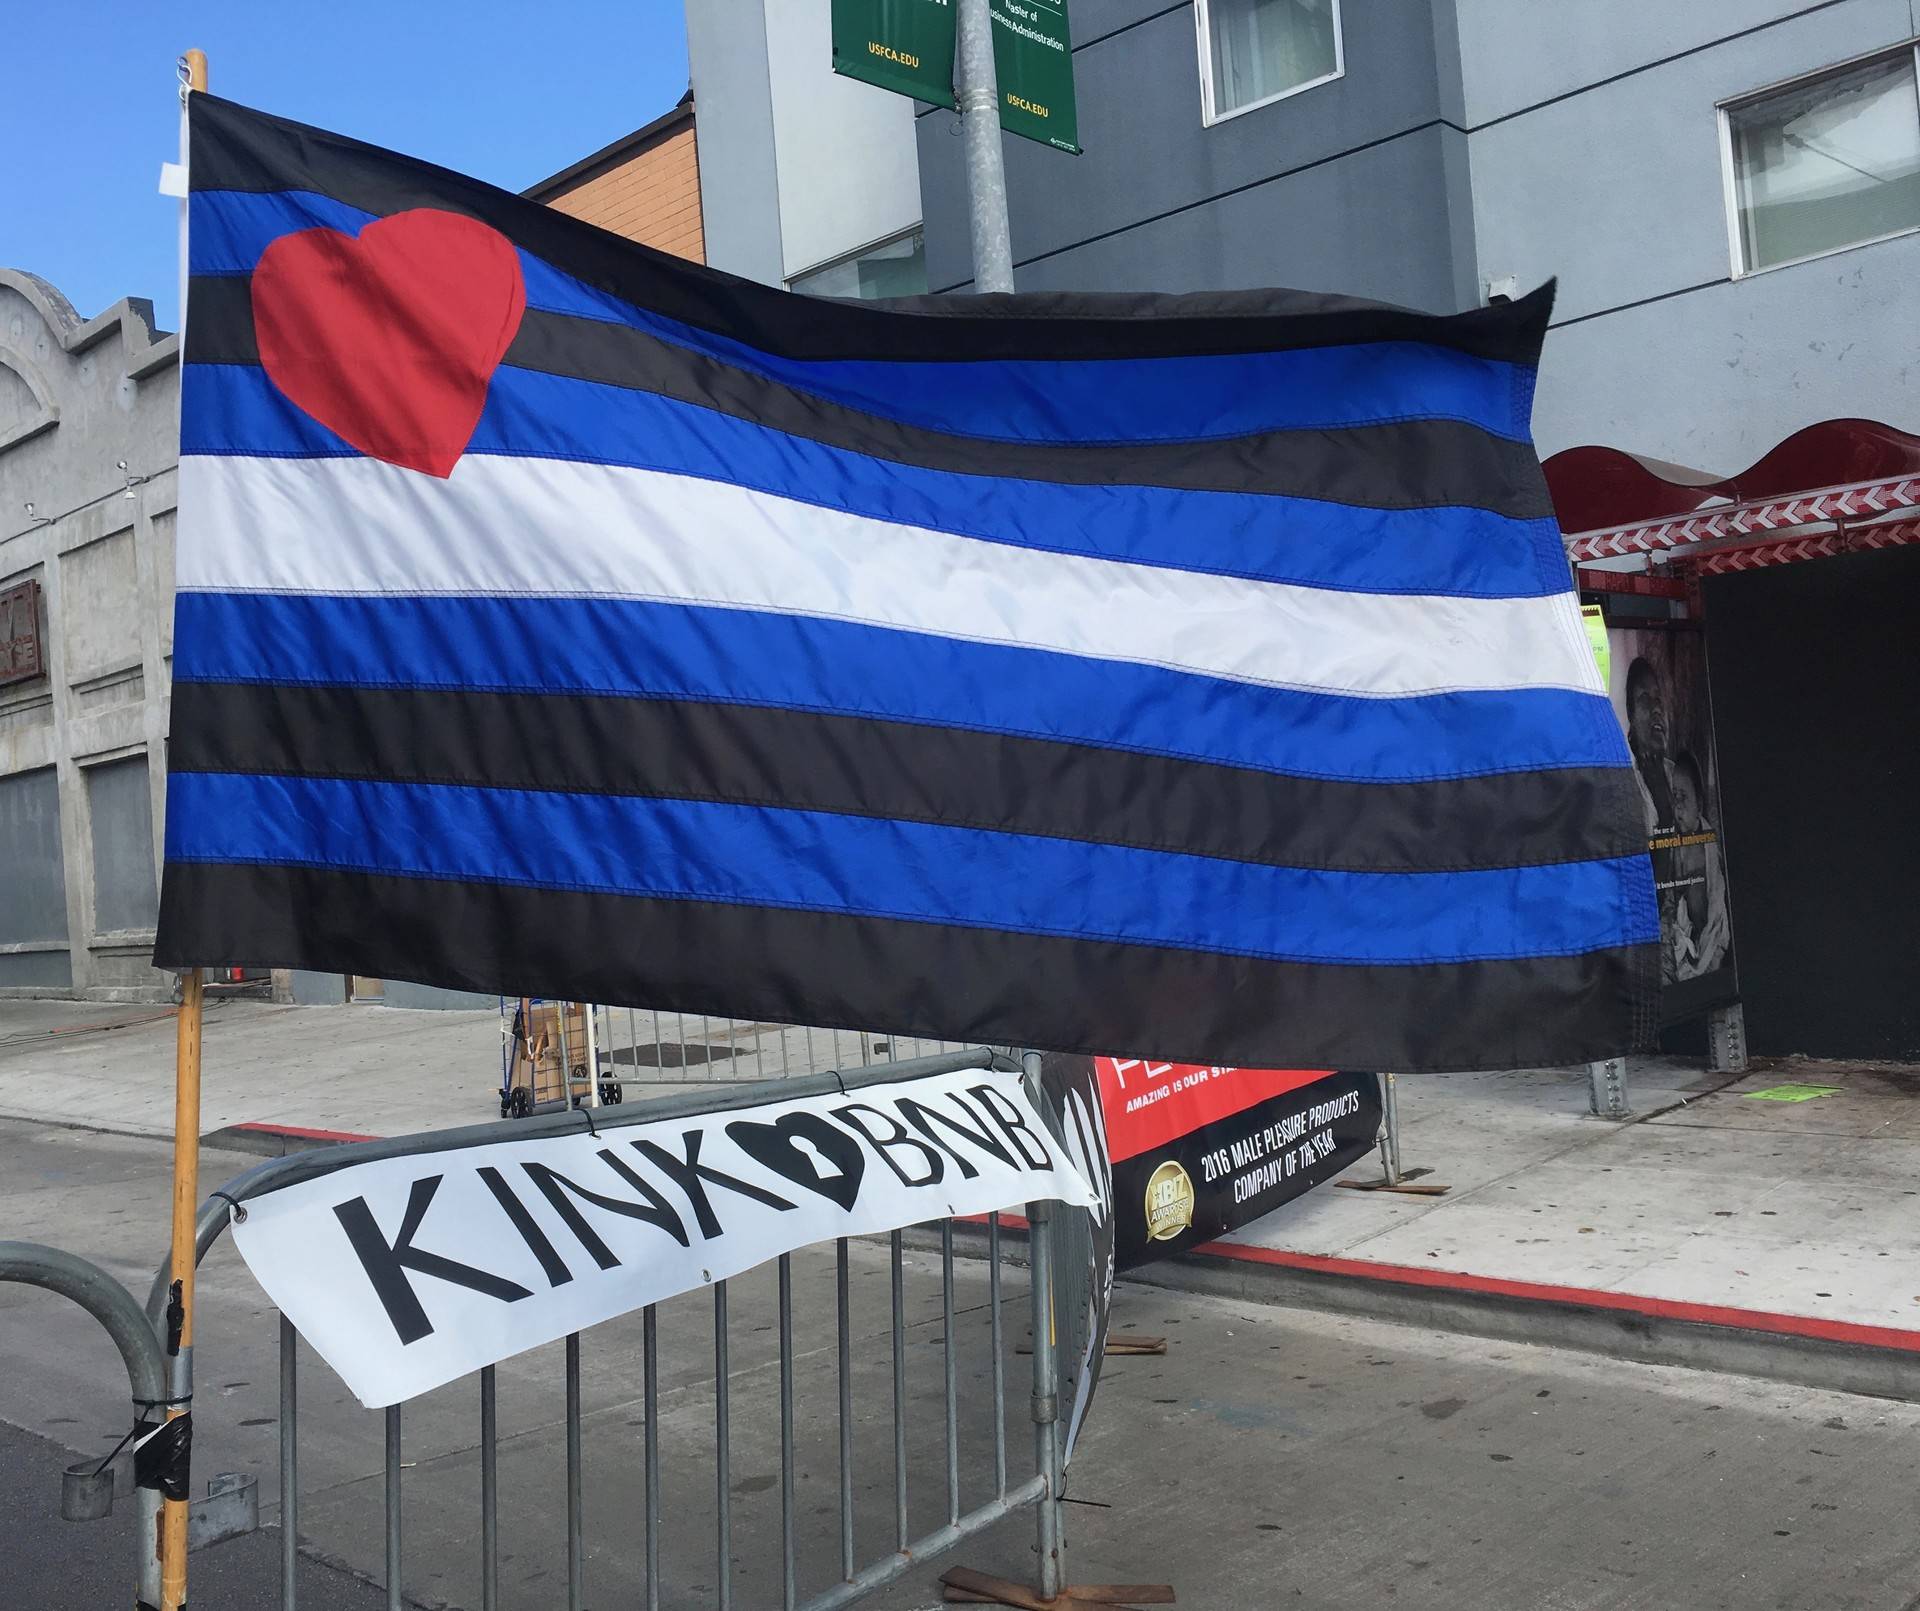 The Leather Pride flag flies at the Folsom Street Fair in San Francisco on Sept. 30, 2018. Michelle Wiley/KQED